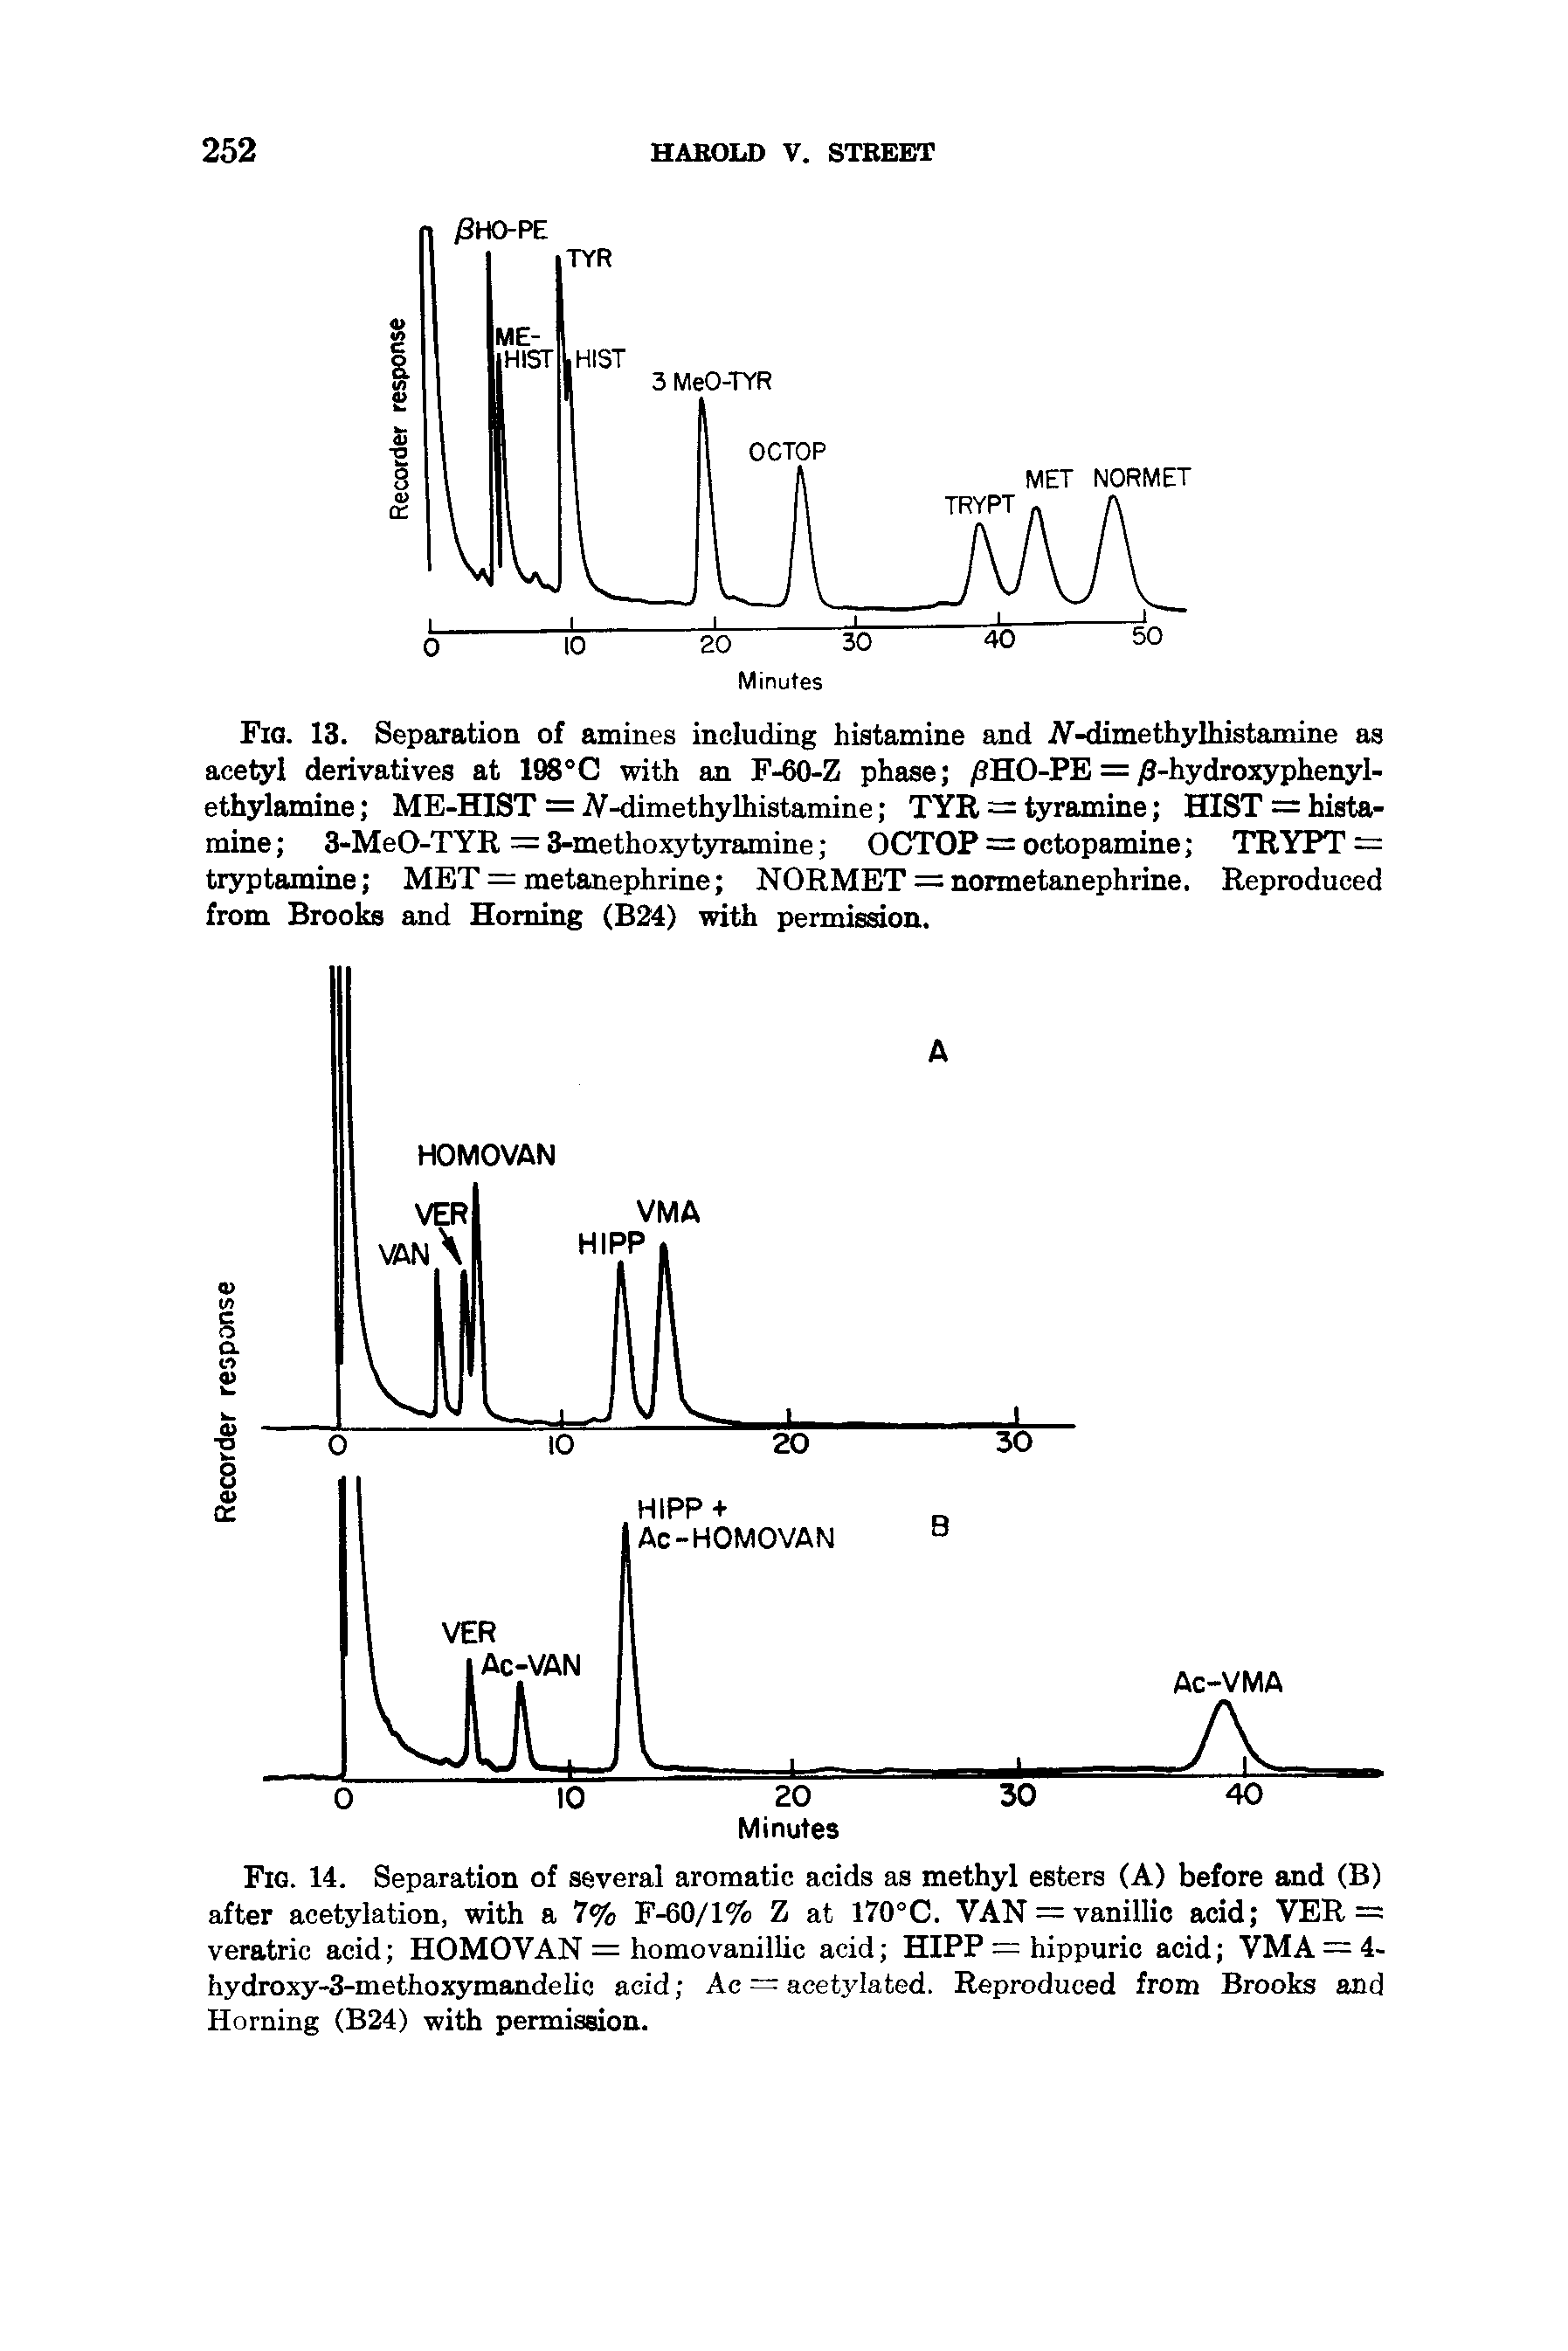 Fig. 13. Separation of amines including histamine and iV-dimethylhistainine as acetyl derivatives at 198°C with an F-60-Z phase /8HO-PE = jS-hydroxyphenyl-ethylamine ME-HIST = iV-dimethyUiistamine TYR = tyramine HIST = histamine 3-MeO-TYR = 3-methoxytyramine OCTOP = octopamine TRYPT = tryptamine MET = metanephrine NORMET = nonnetanephrine. Reproduced from Brooks and Homing (B24) with permission.